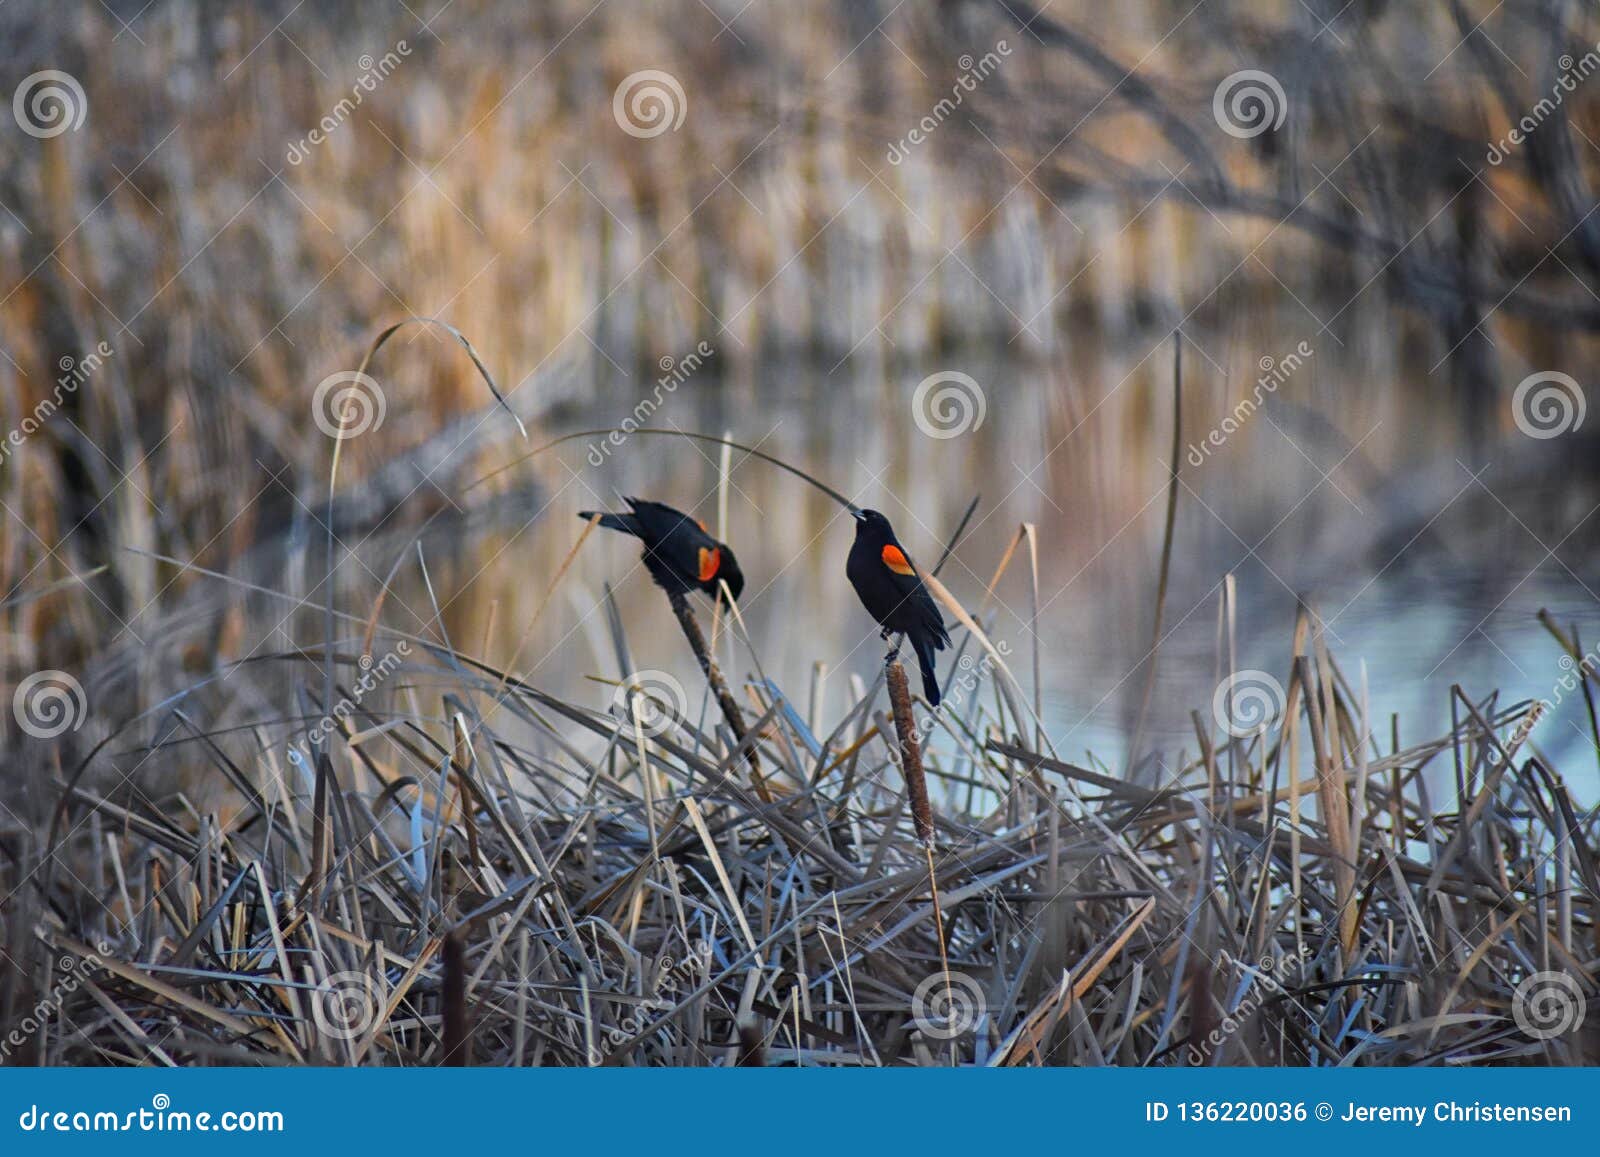 red winged blackbird agelaius phoeniceus close up in the wild in colorado is a passerine bird of the family icteridae found in m